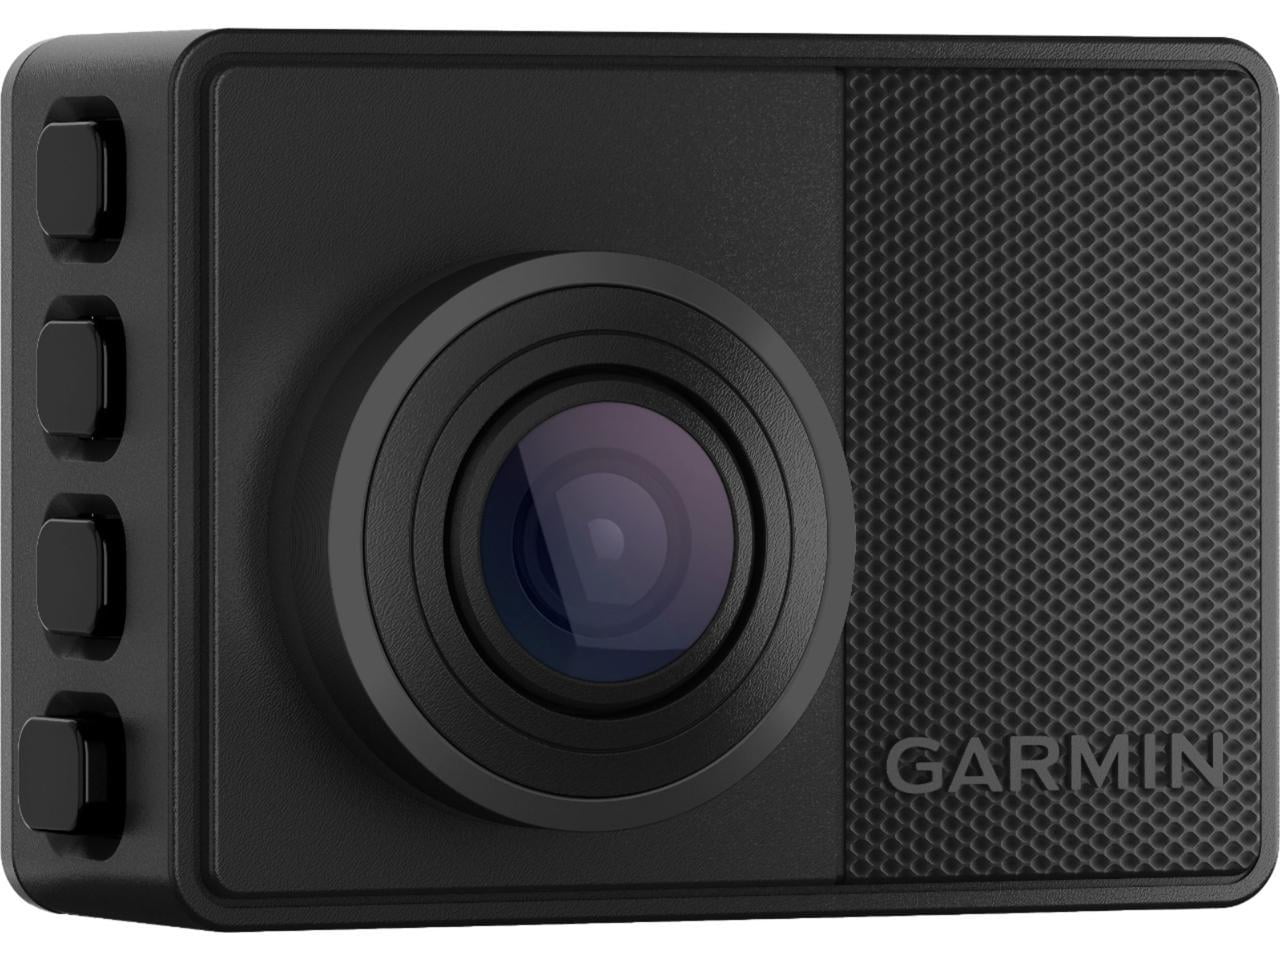 Garmin Dash Cam 57, 1440p and 140-degree FOV, Monitor Your Vehicle While  Away w/ New Connected Features, Voice Control, Compact and Discreet,  Includes